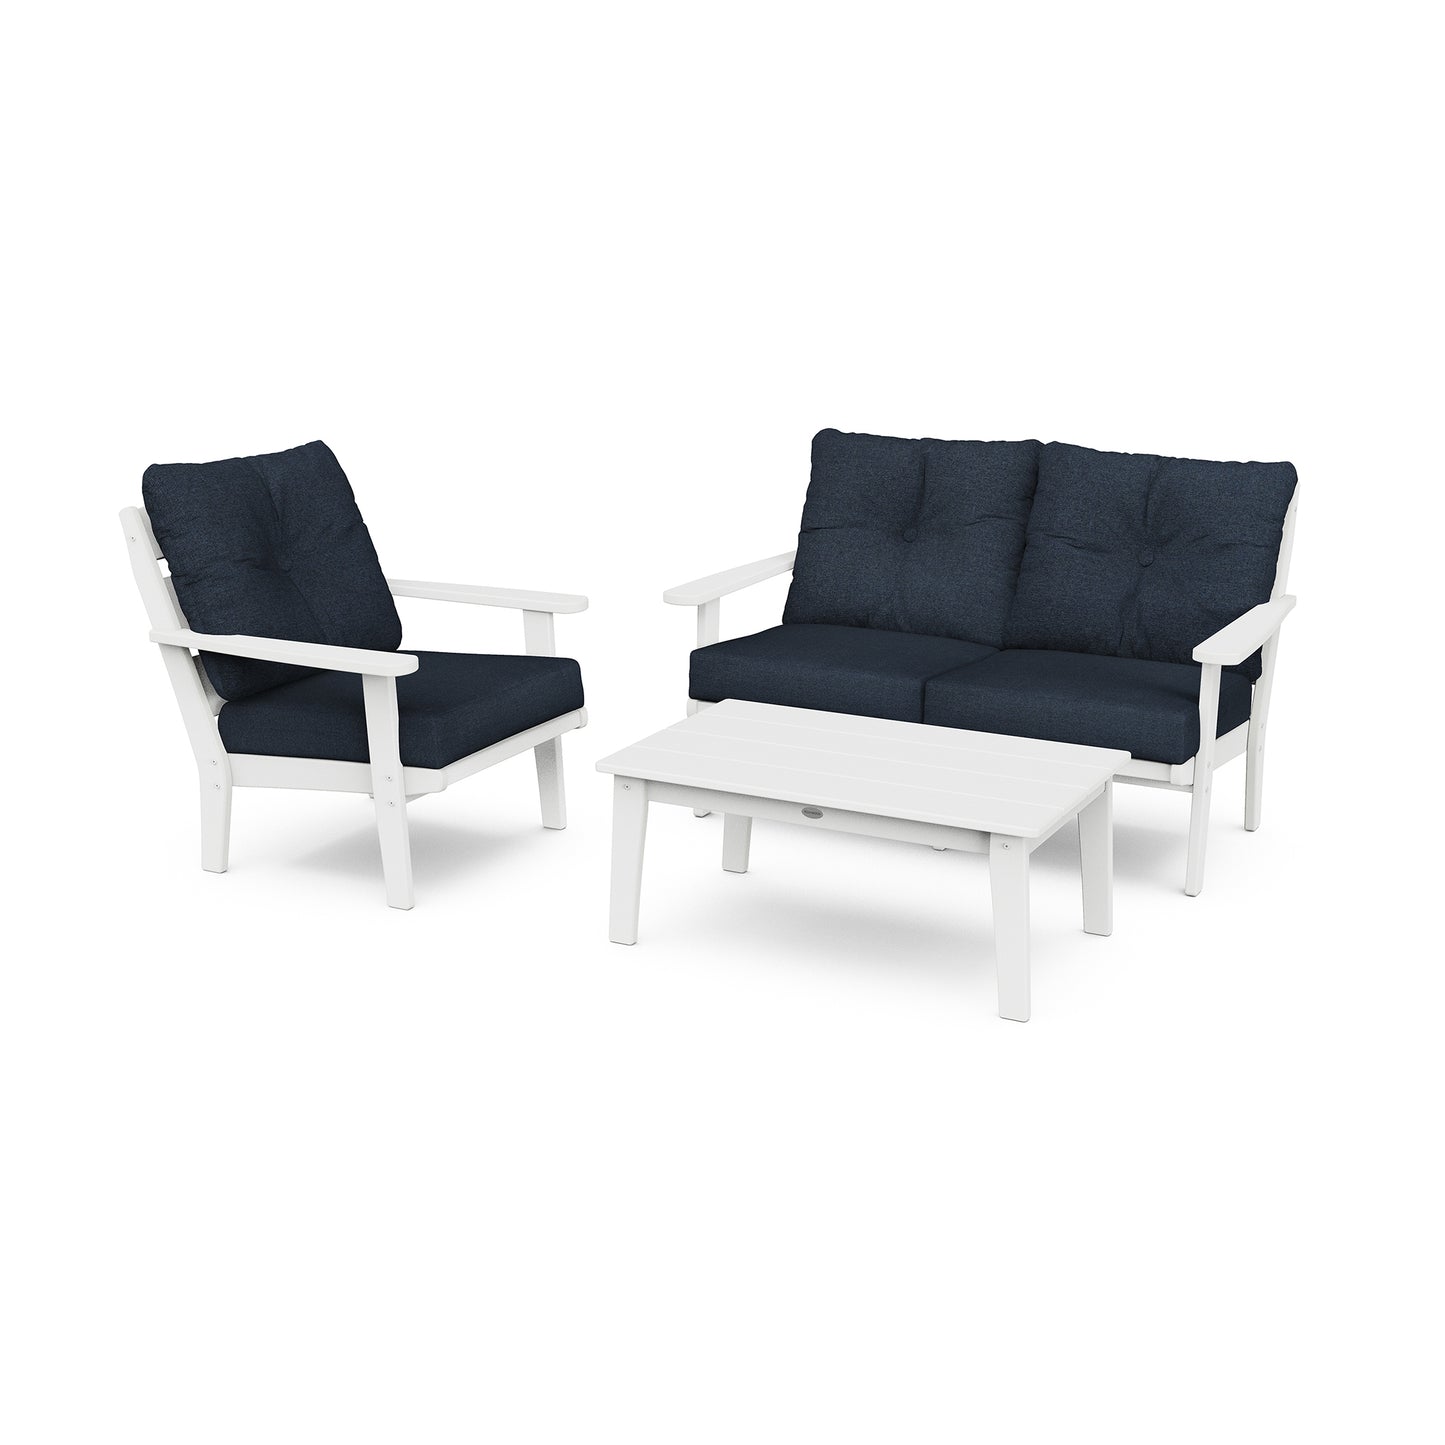 A set of POLYWOOD Lakeside 3-Piece Deep Seating Set featuring two white armchairs with dark blue cushions and a matching white rectangular coffee table, isolated on a white background.